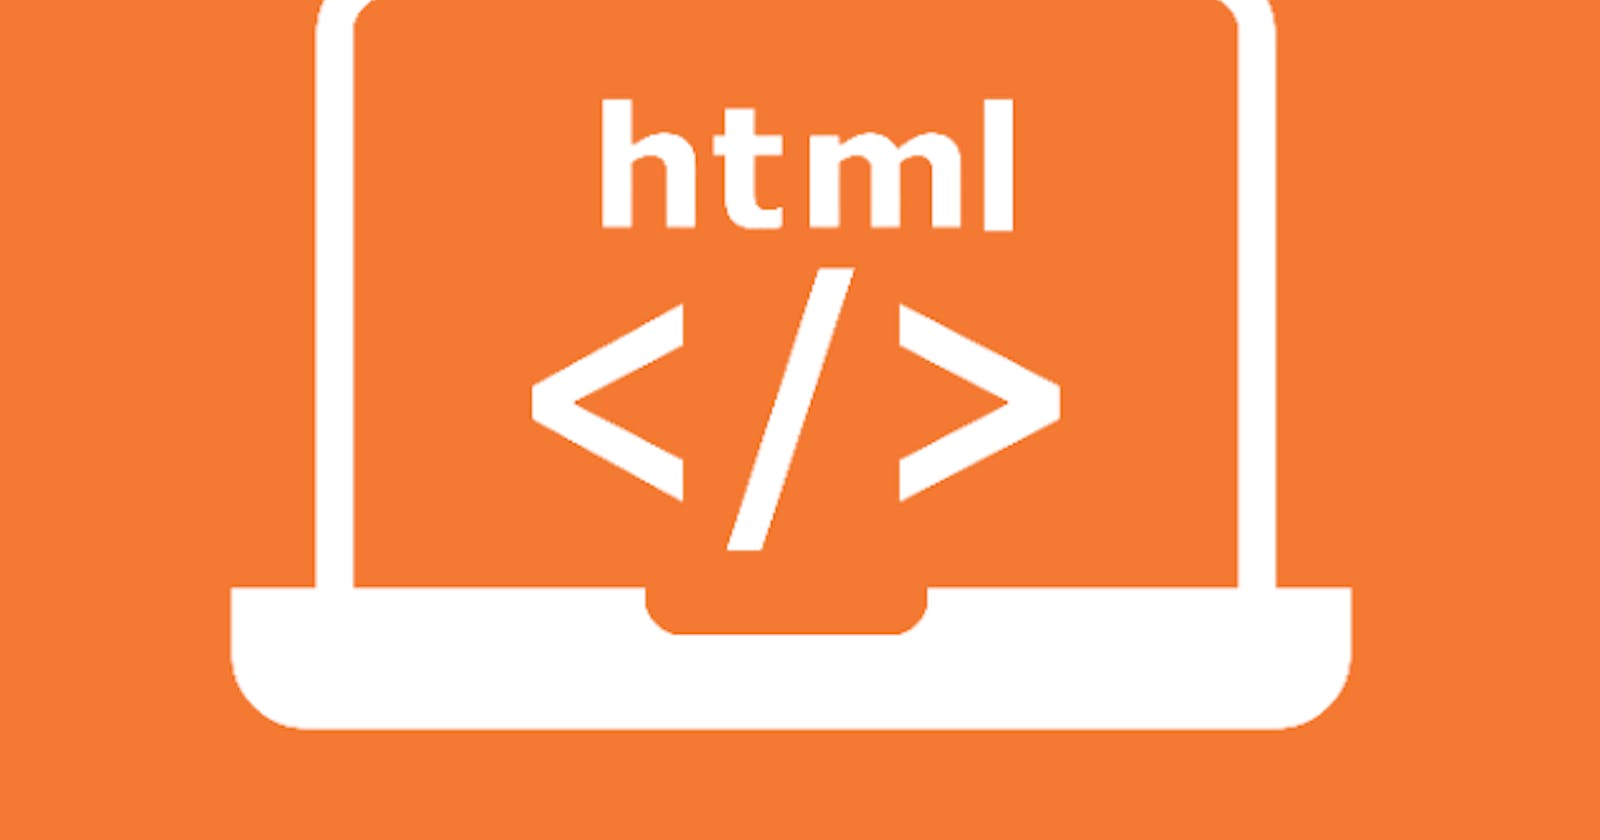 Top useful tags in HTML